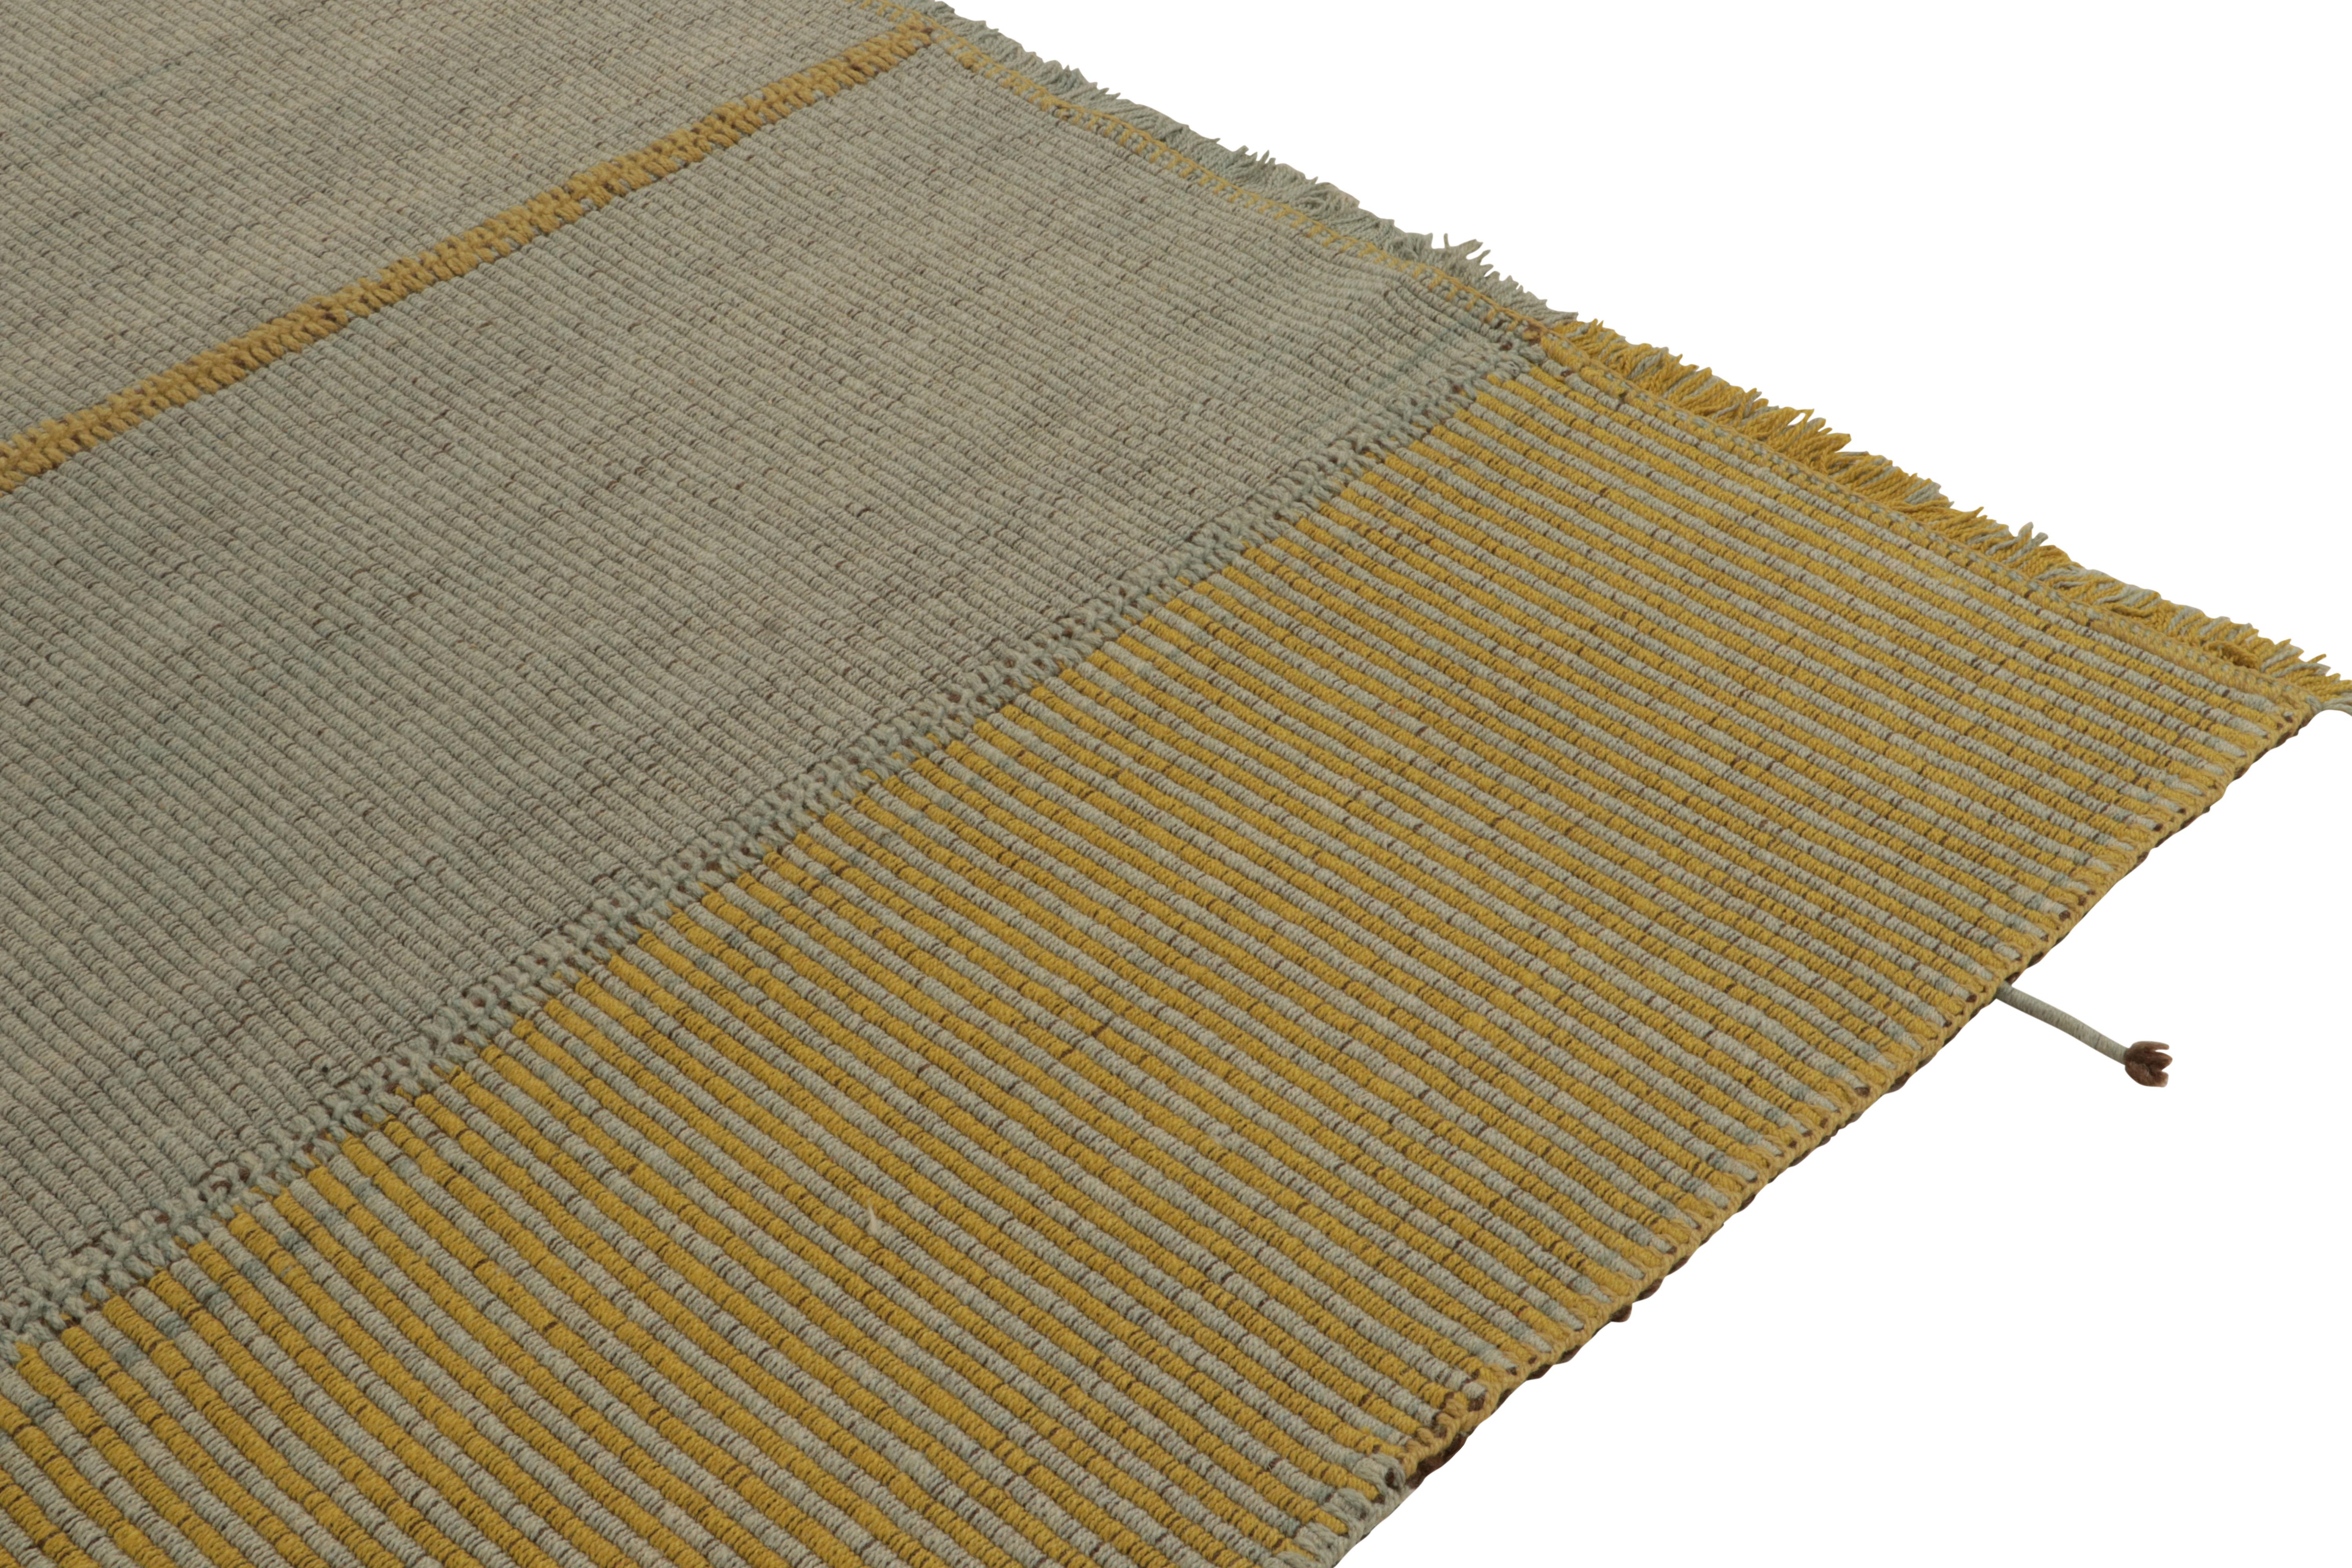 Rug & Kilim’s Contemporary Custom Kilim in Blue with Ochre-Yellow In New Condition For Sale In Long Island City, NY